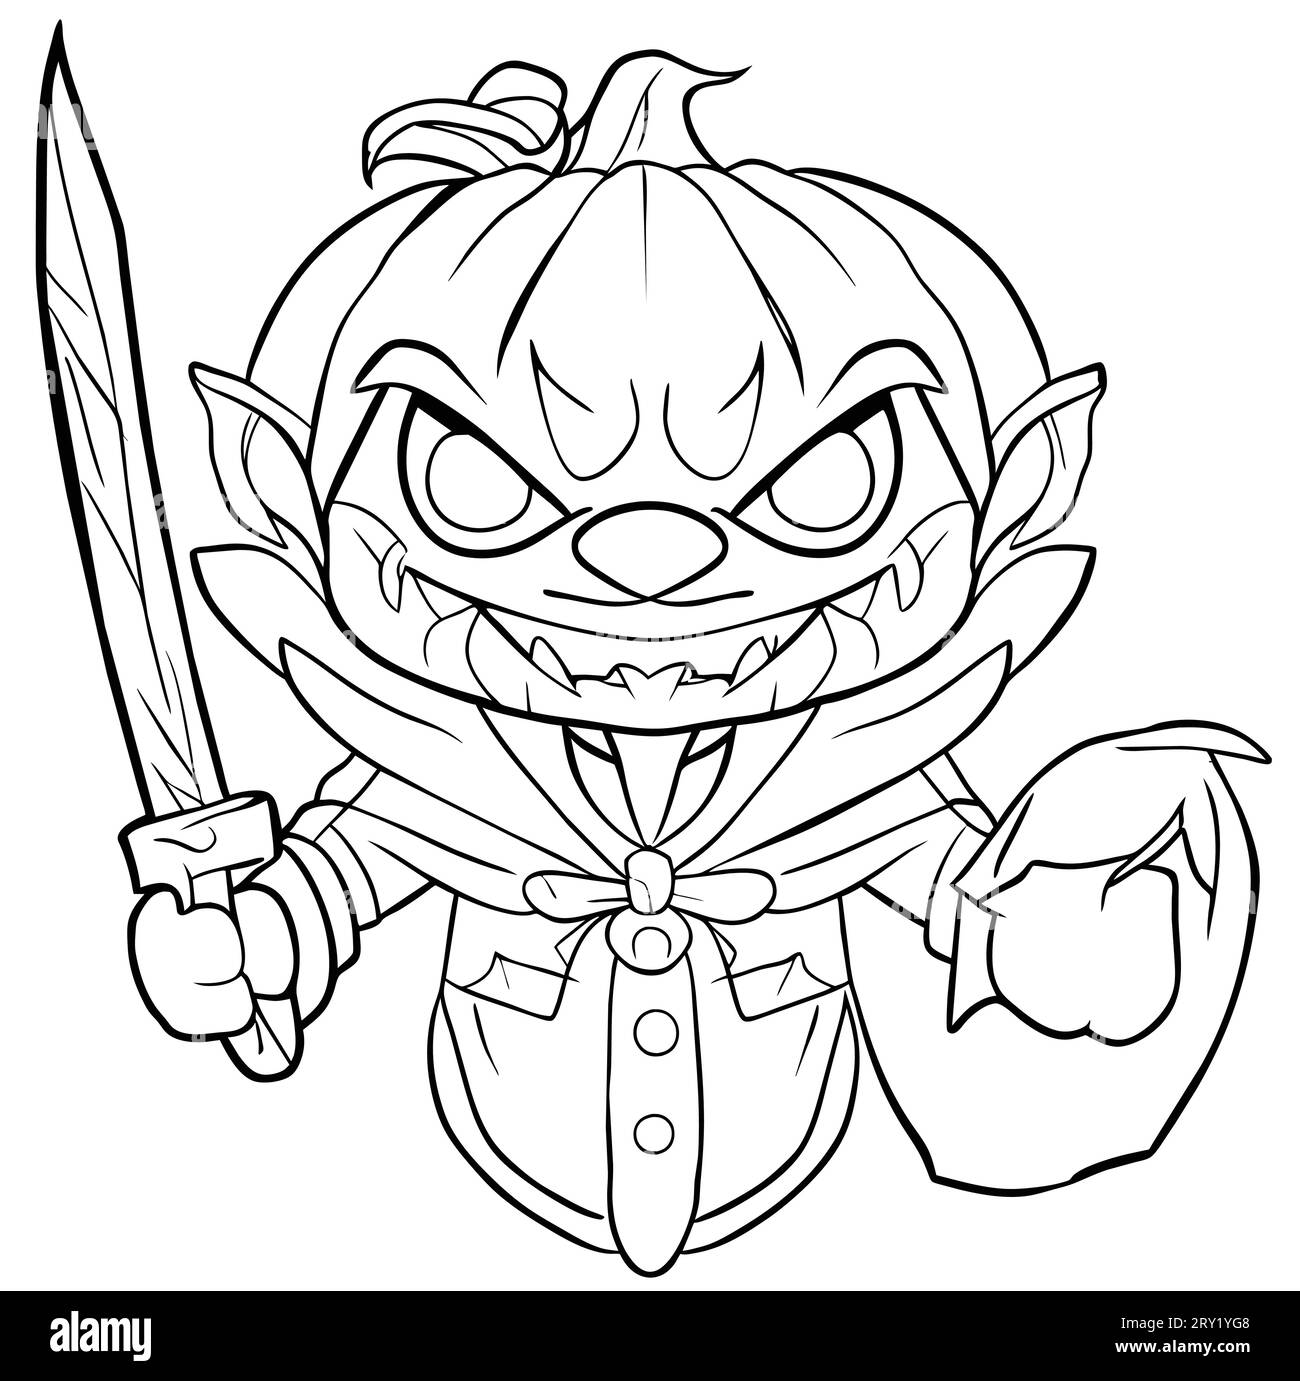 Pumpkin with knife coloring page vector stock vector image art